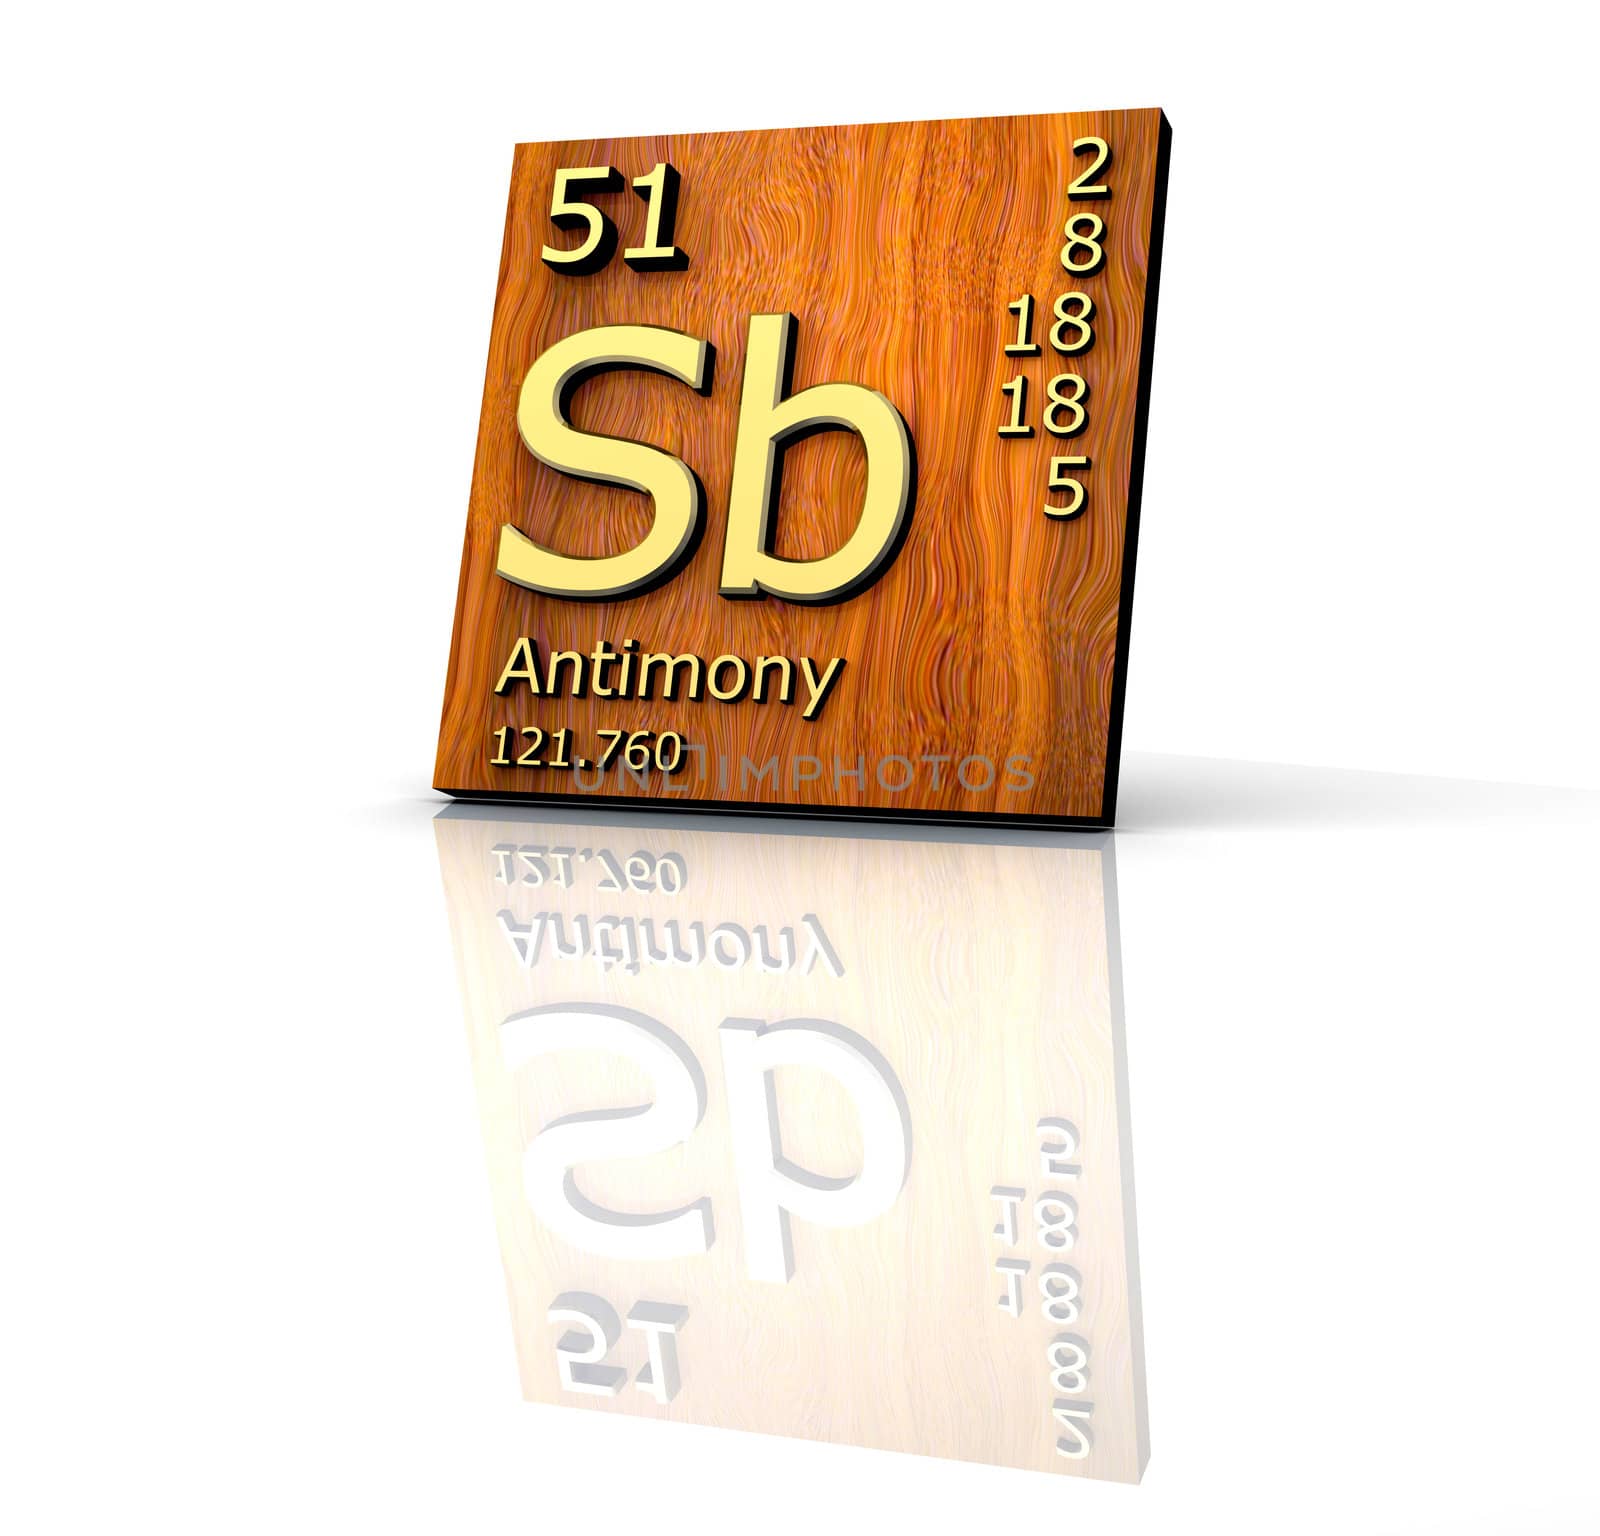 Antimony form Periodic Table of Elements - wood board - 3d made